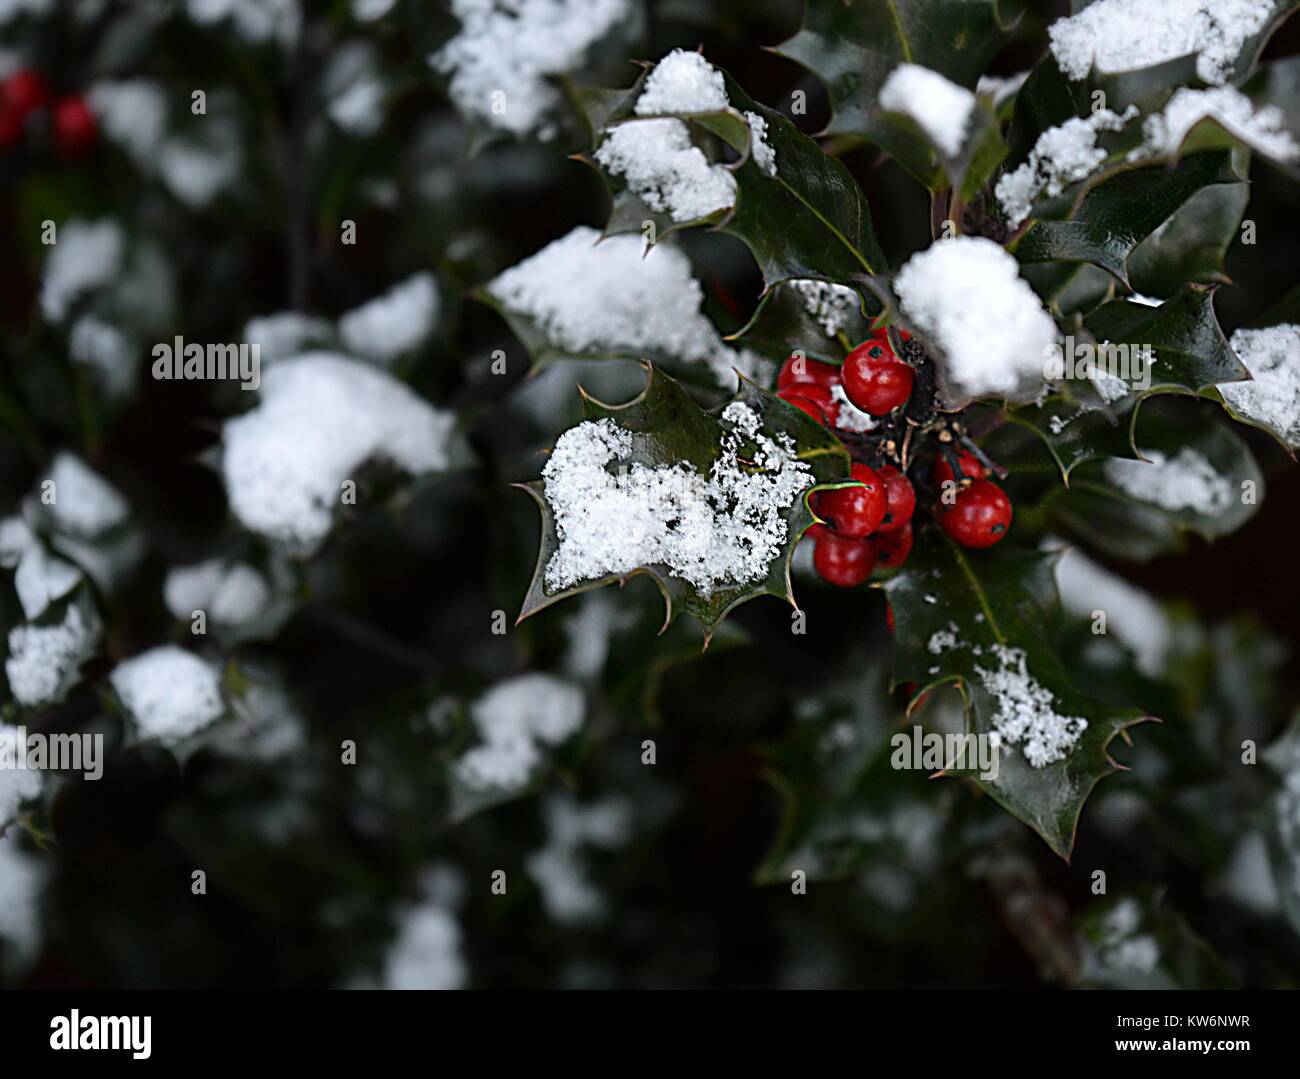 Snow on hollybush with berries in Winter Sutton Coldfield Garden Stock Photo